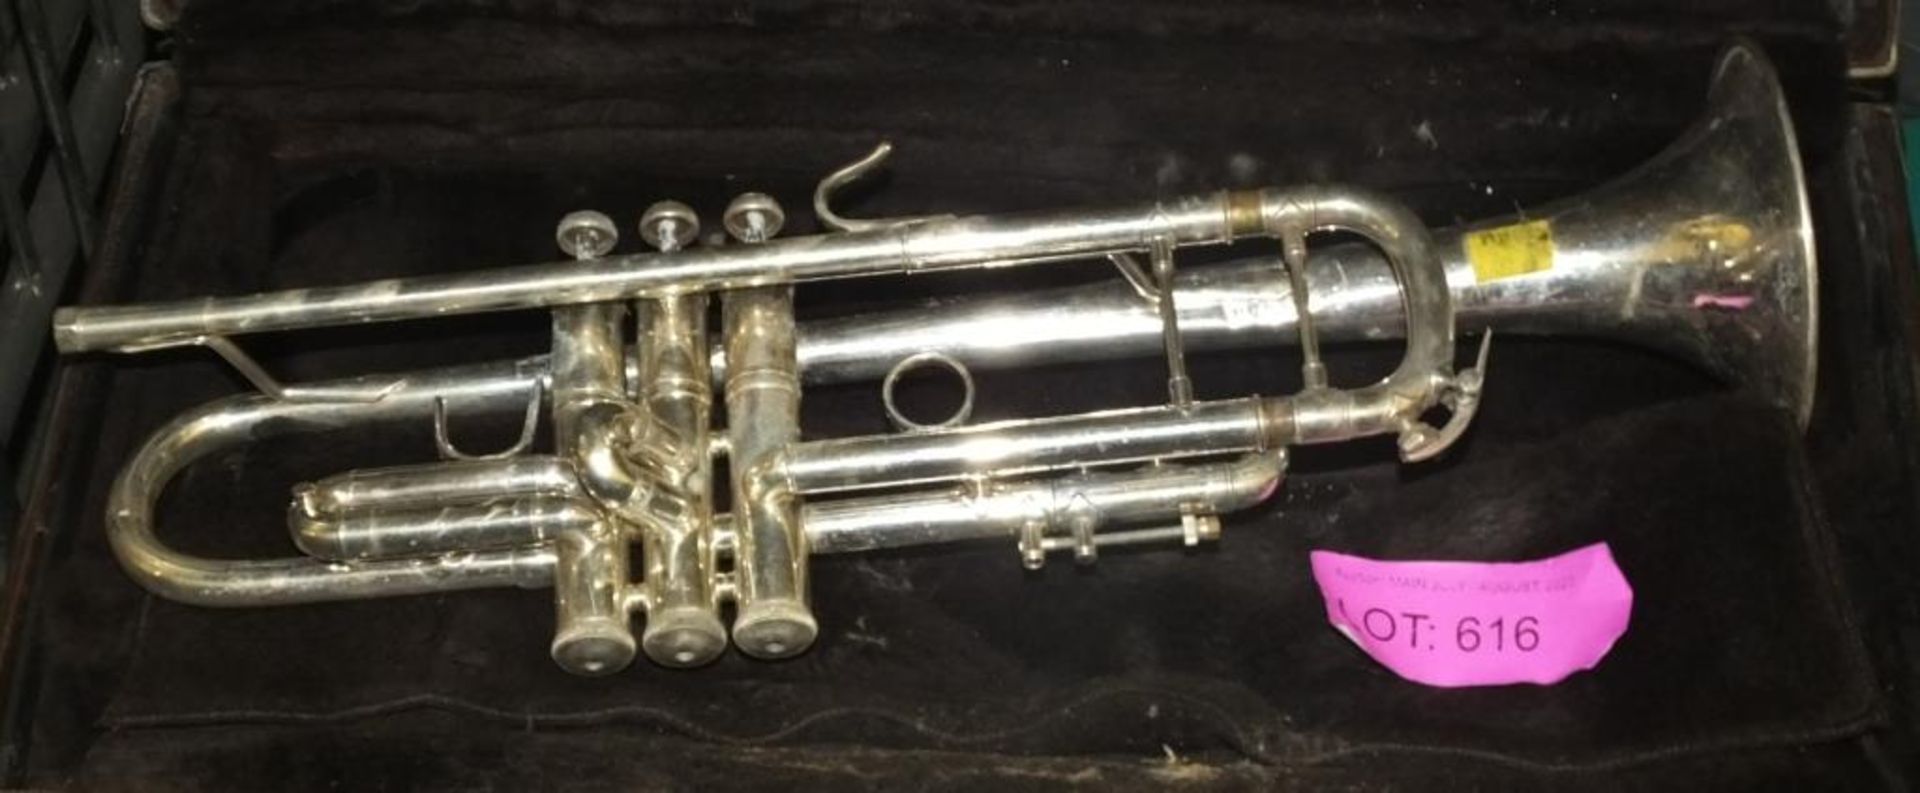 Bach Stradivrius 37 Trumpet - Cased in need of repair